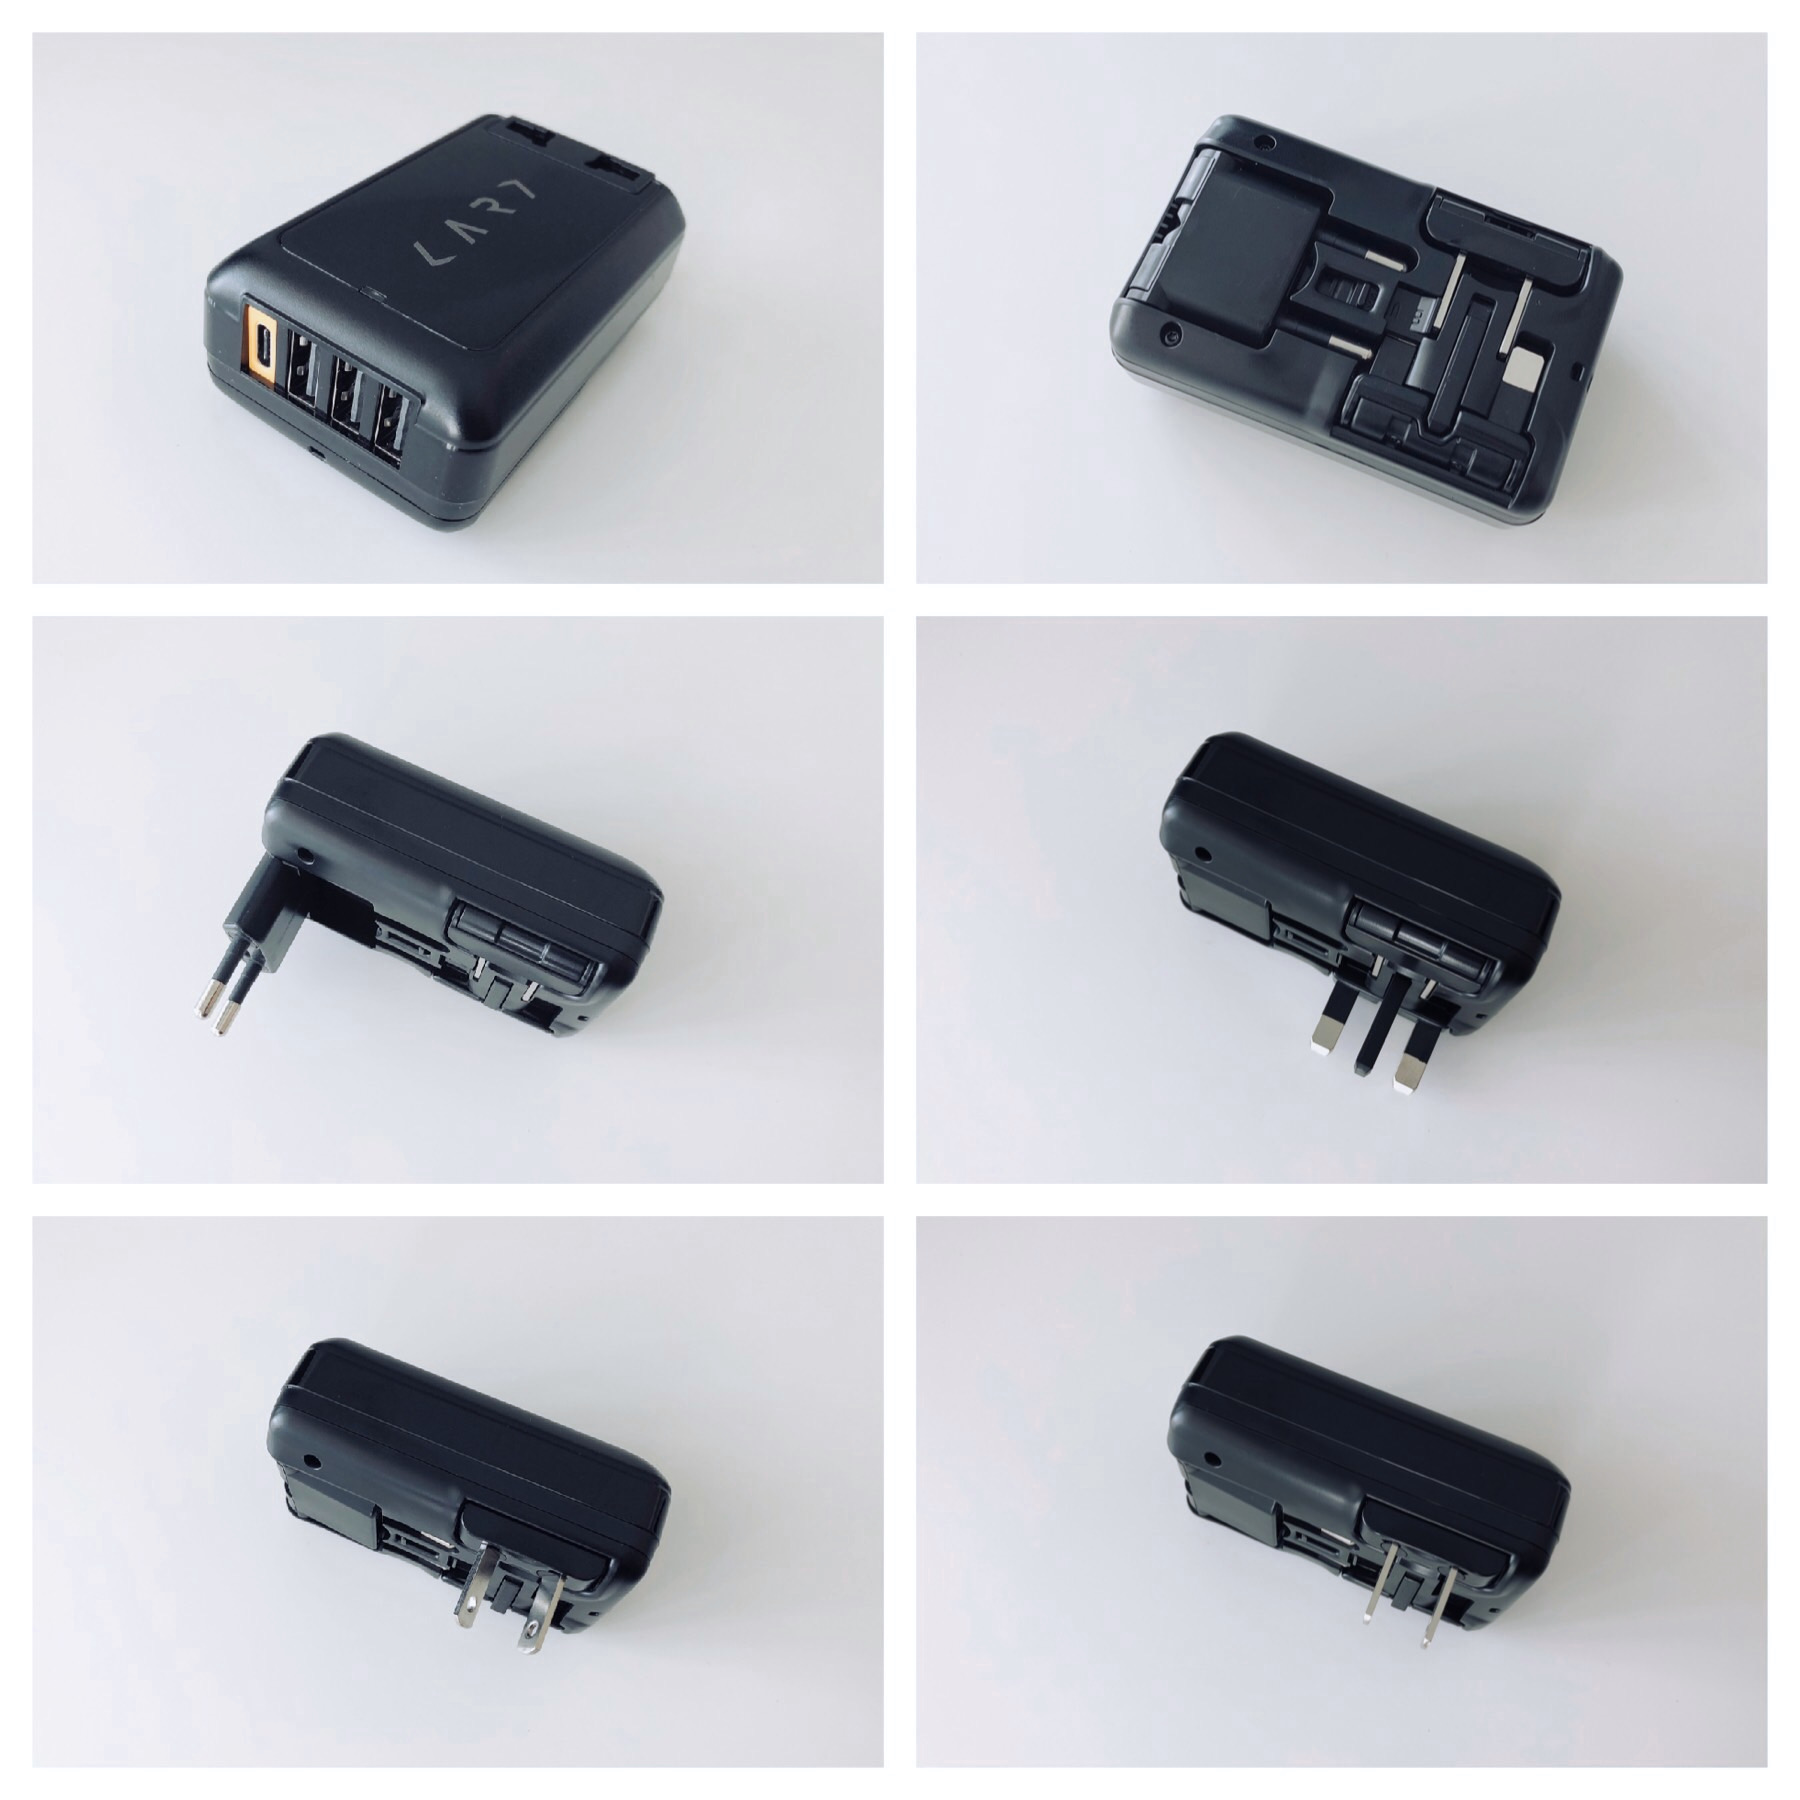 CARD Travel Adapter 4-Pro charging adapter configurations